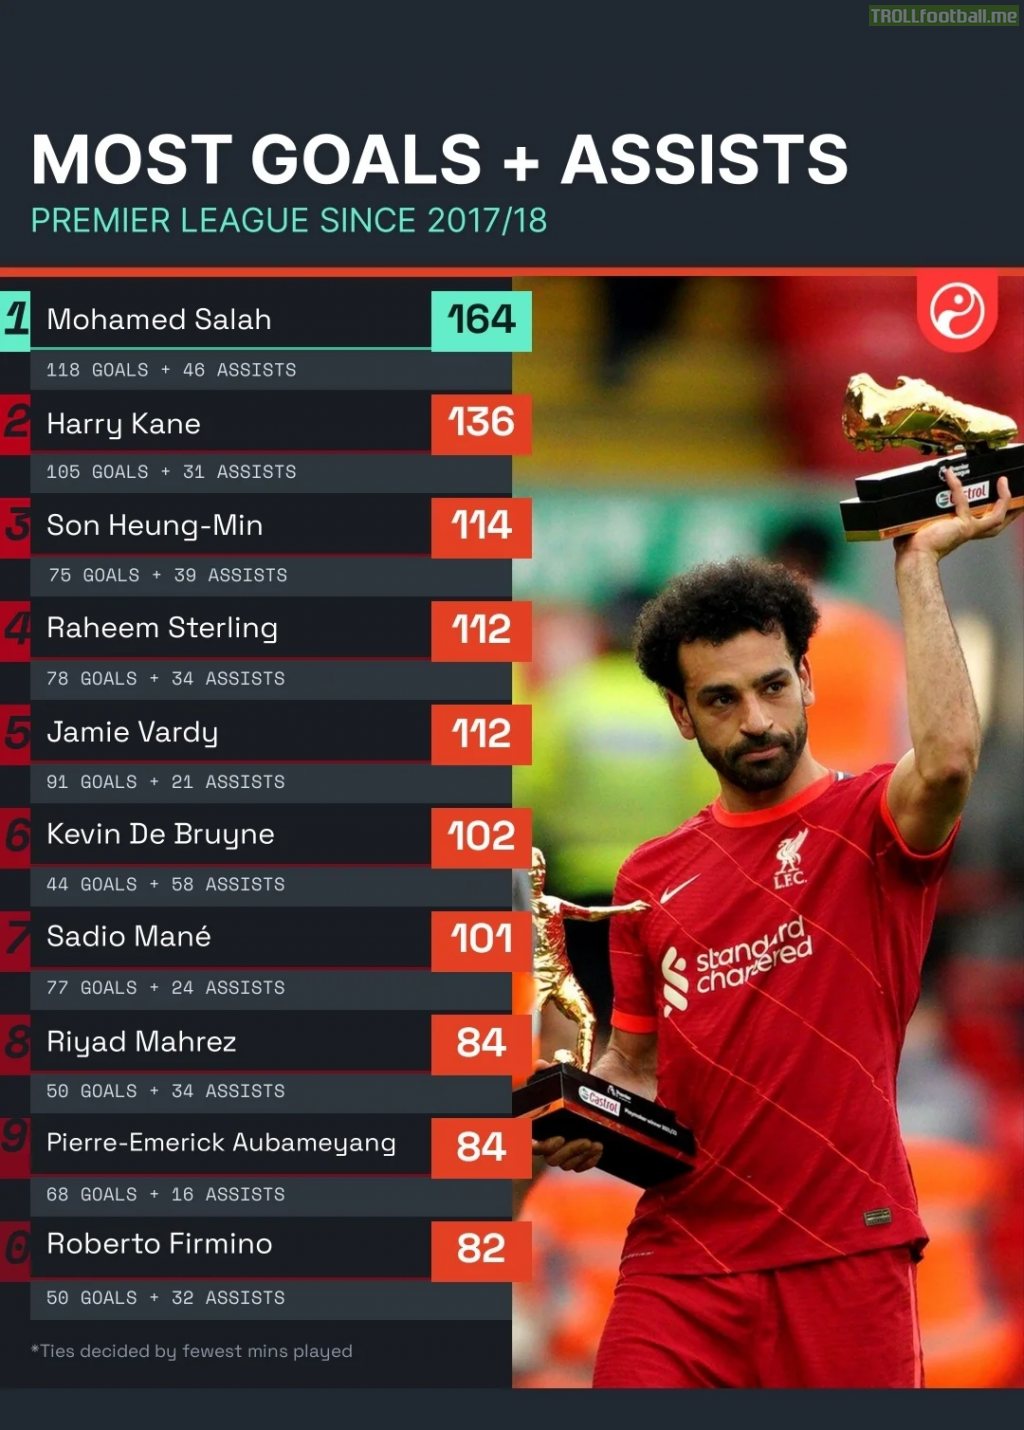 [Squawka] Most Goals + Assists in the Premier League since Mo Salah joined Liverpool.